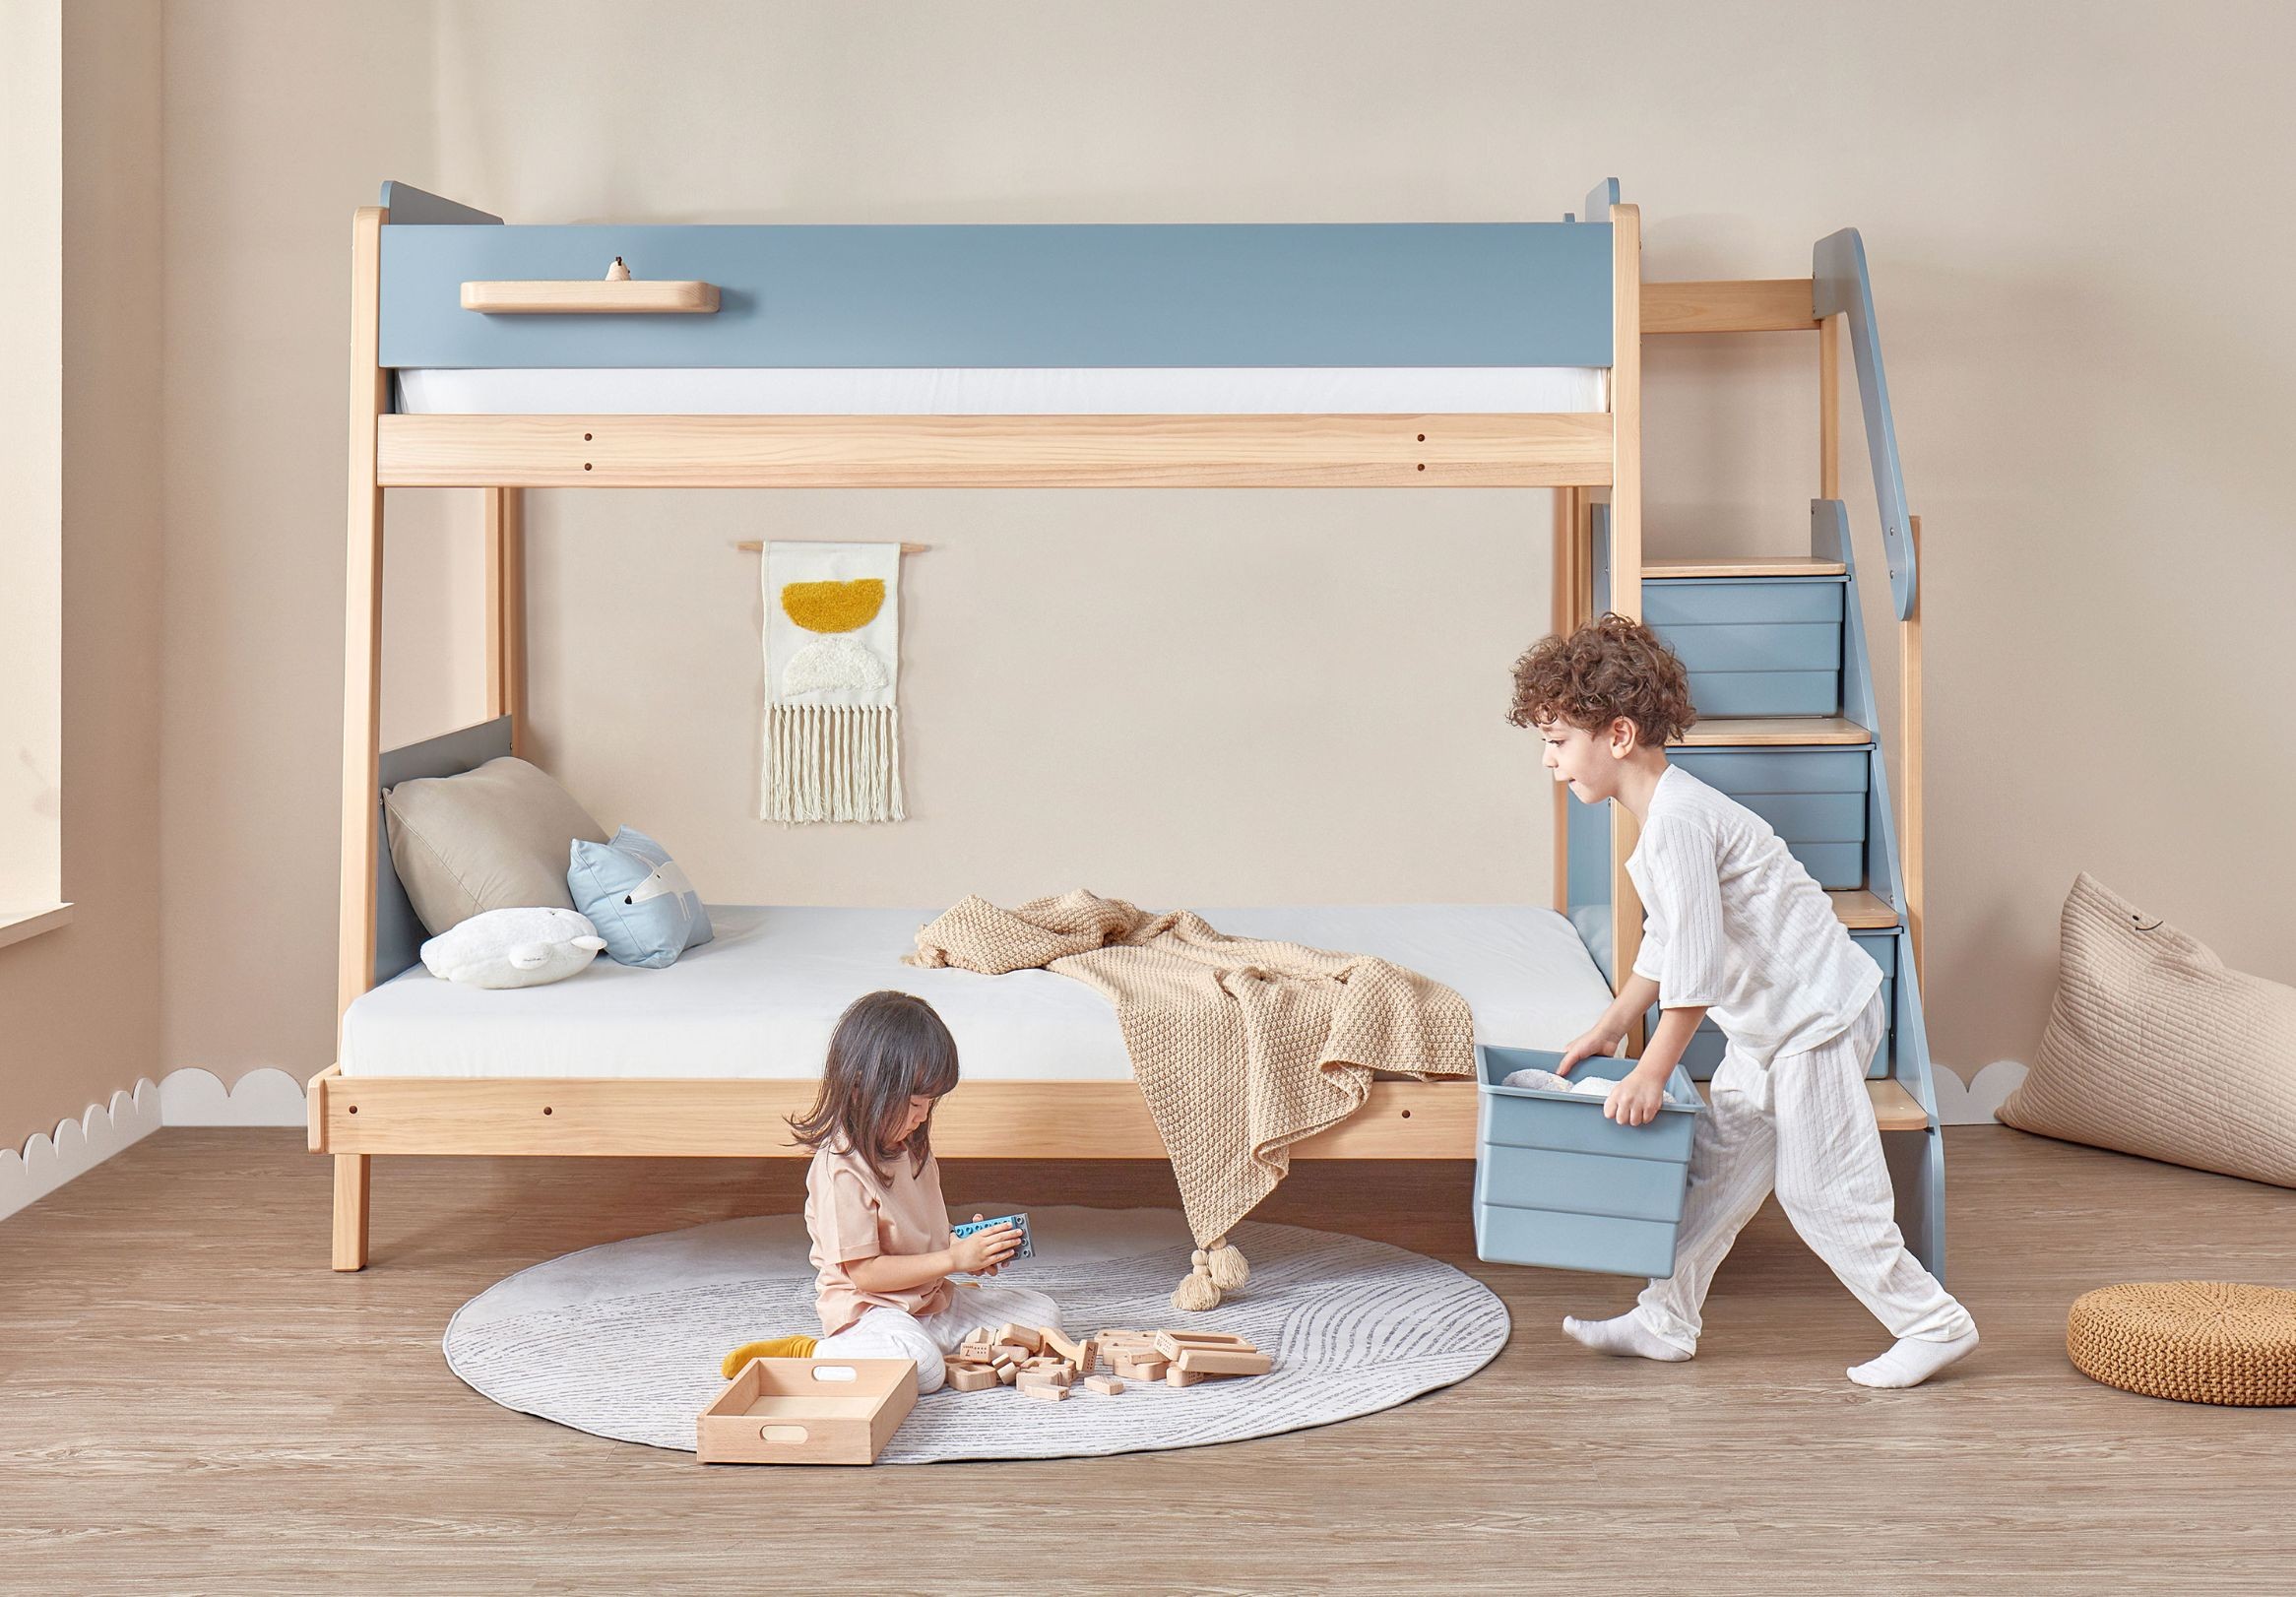 Natty Maxi Bunk Bed for kids room with stair storage boxes